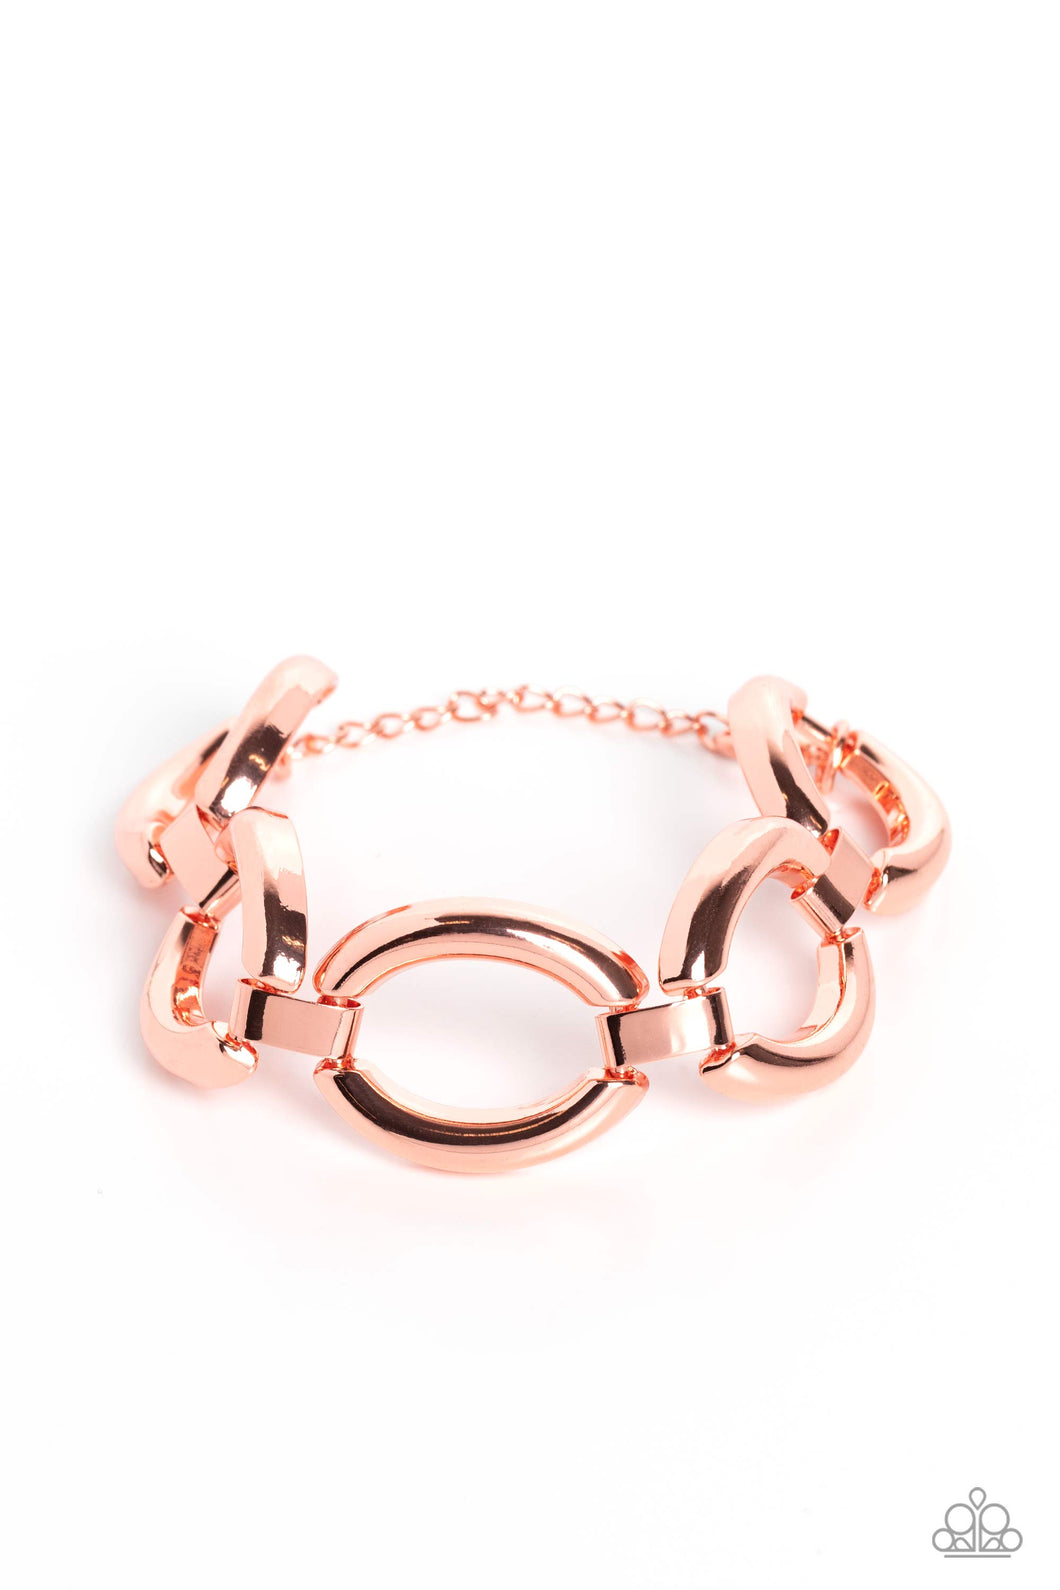 Paparazzi Bracelet Constructed Chic - Copper Coming Soon